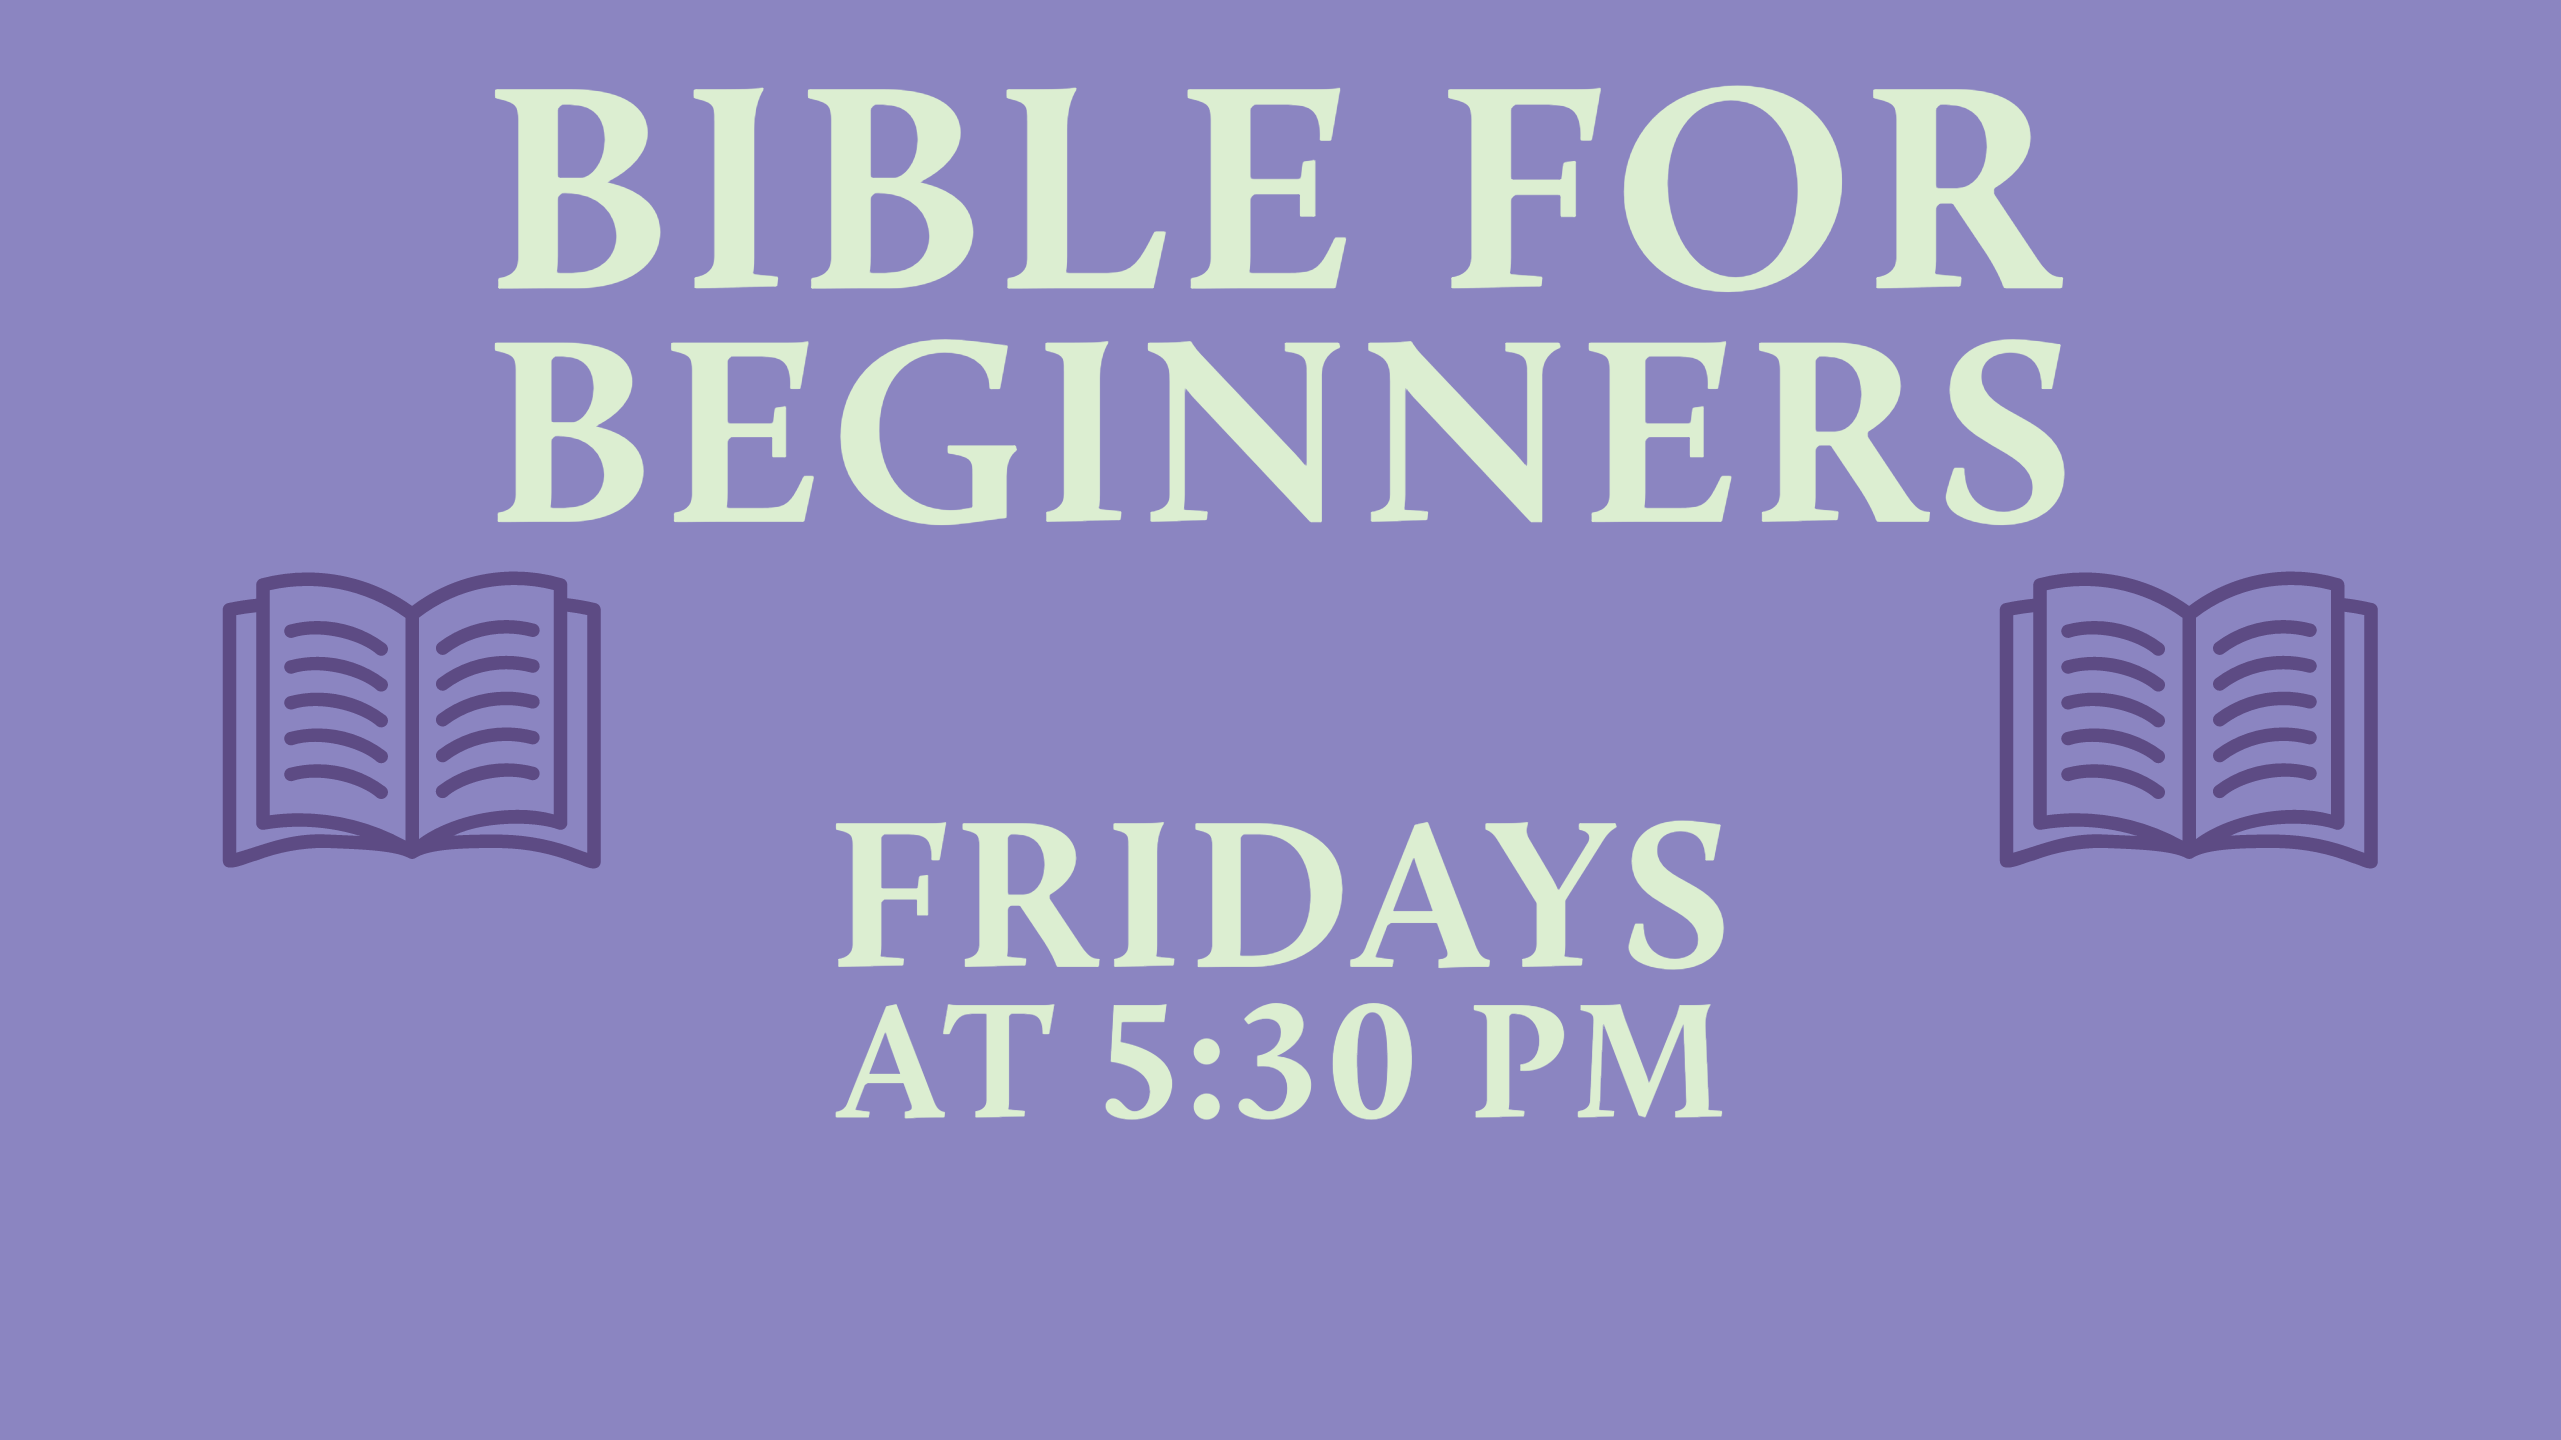 dark purple icons of open books on a purple background with light green text reading "Bible for Beginners Fridays at 5:30 PM"